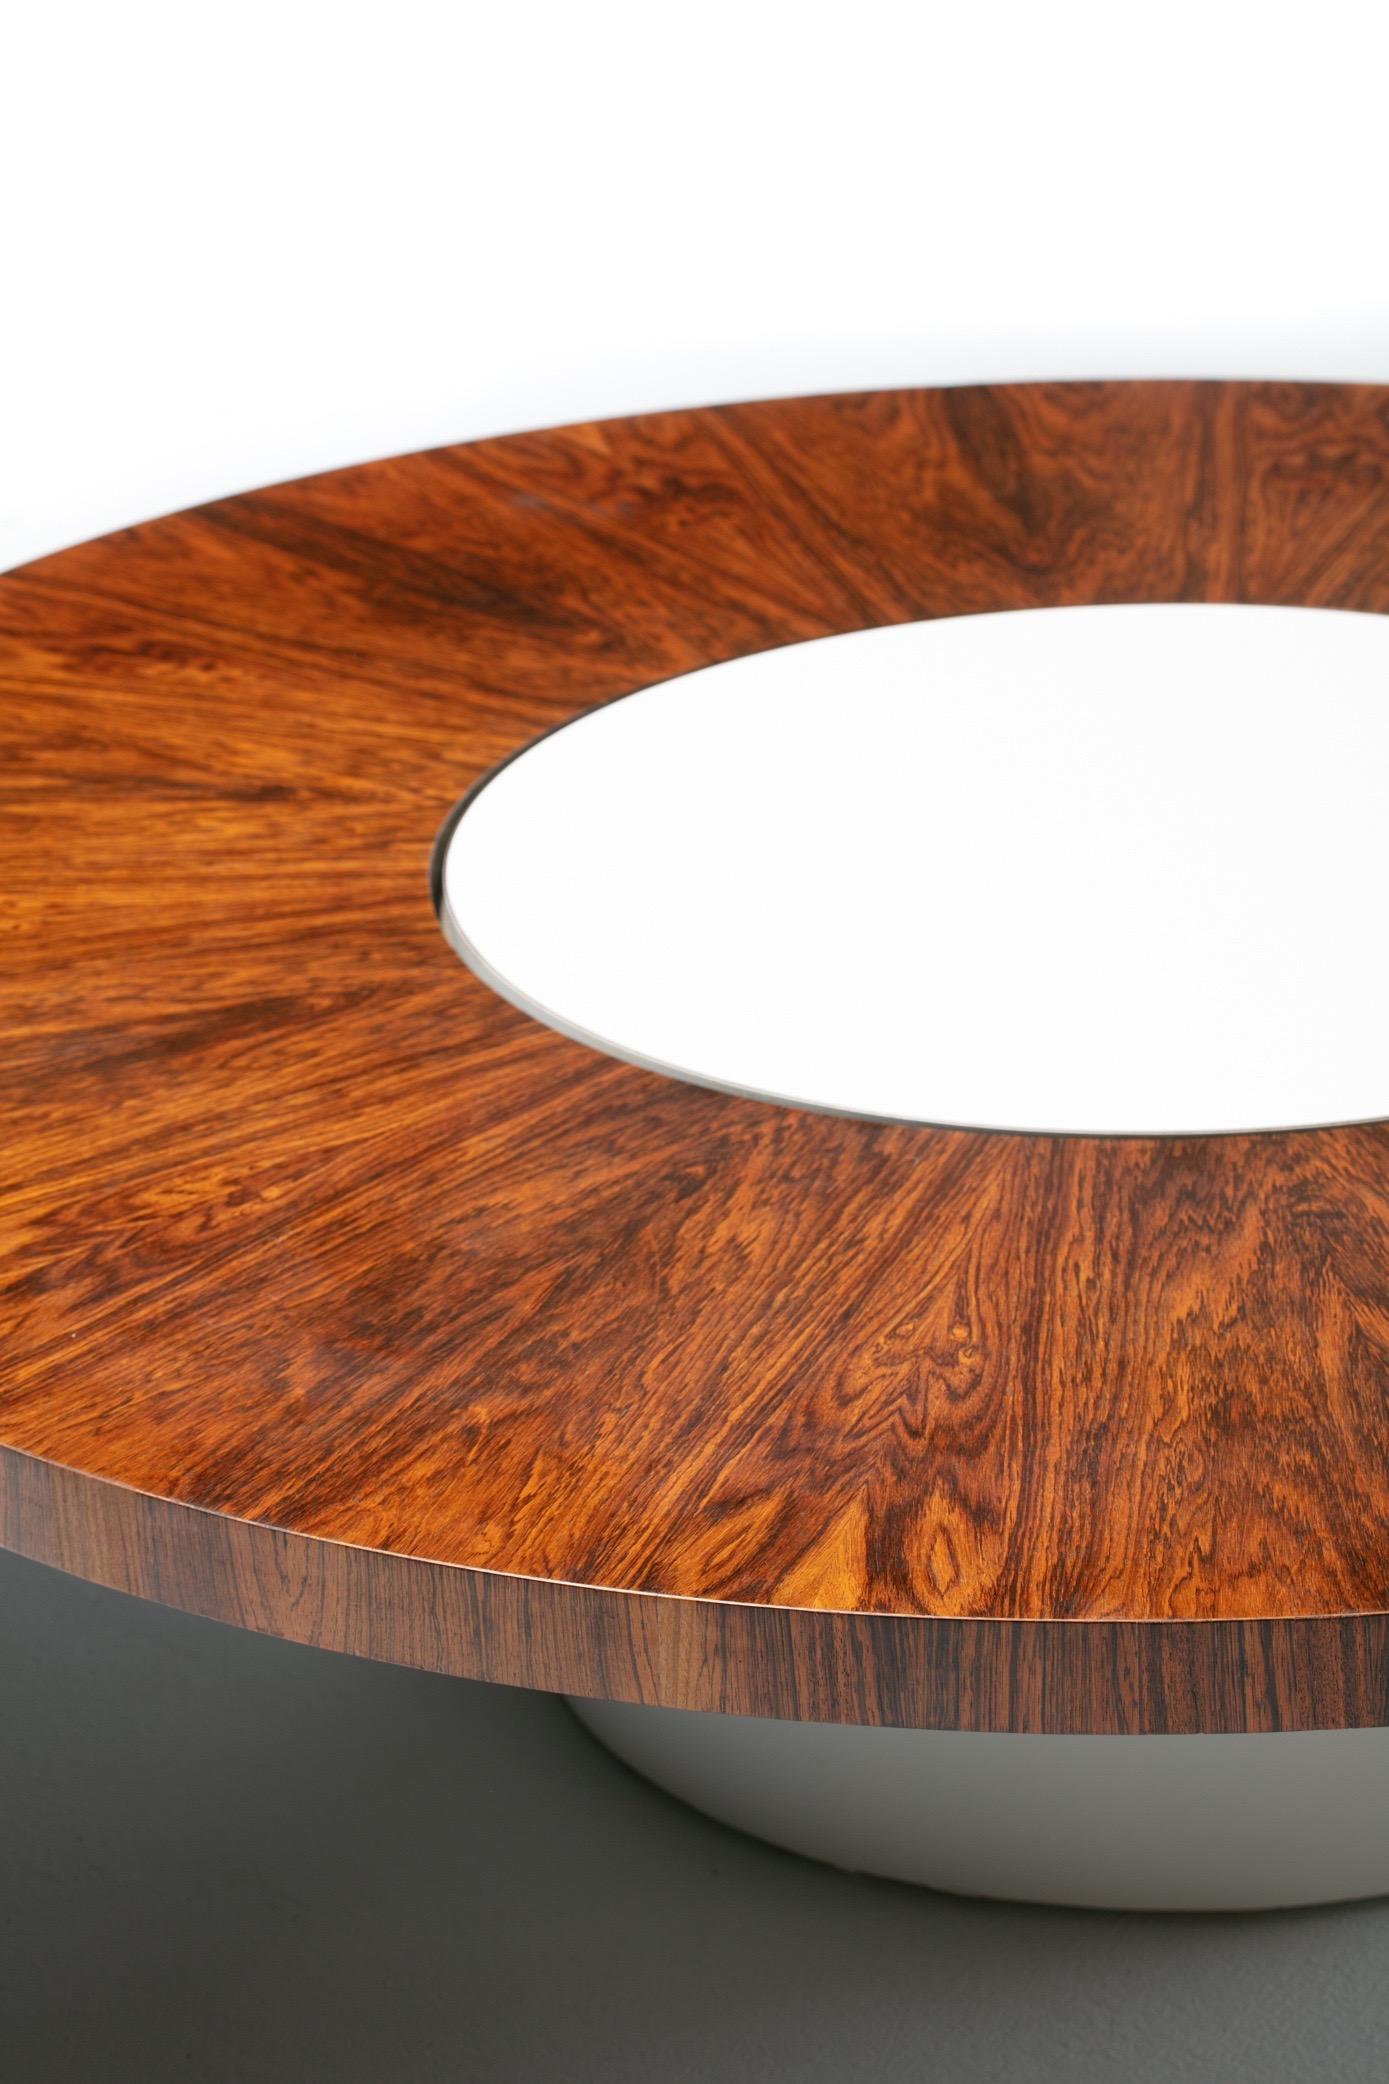 Mid-20th Century Milo Baughman Rosewood and White Lazy Susan Coffee Table circa 1960